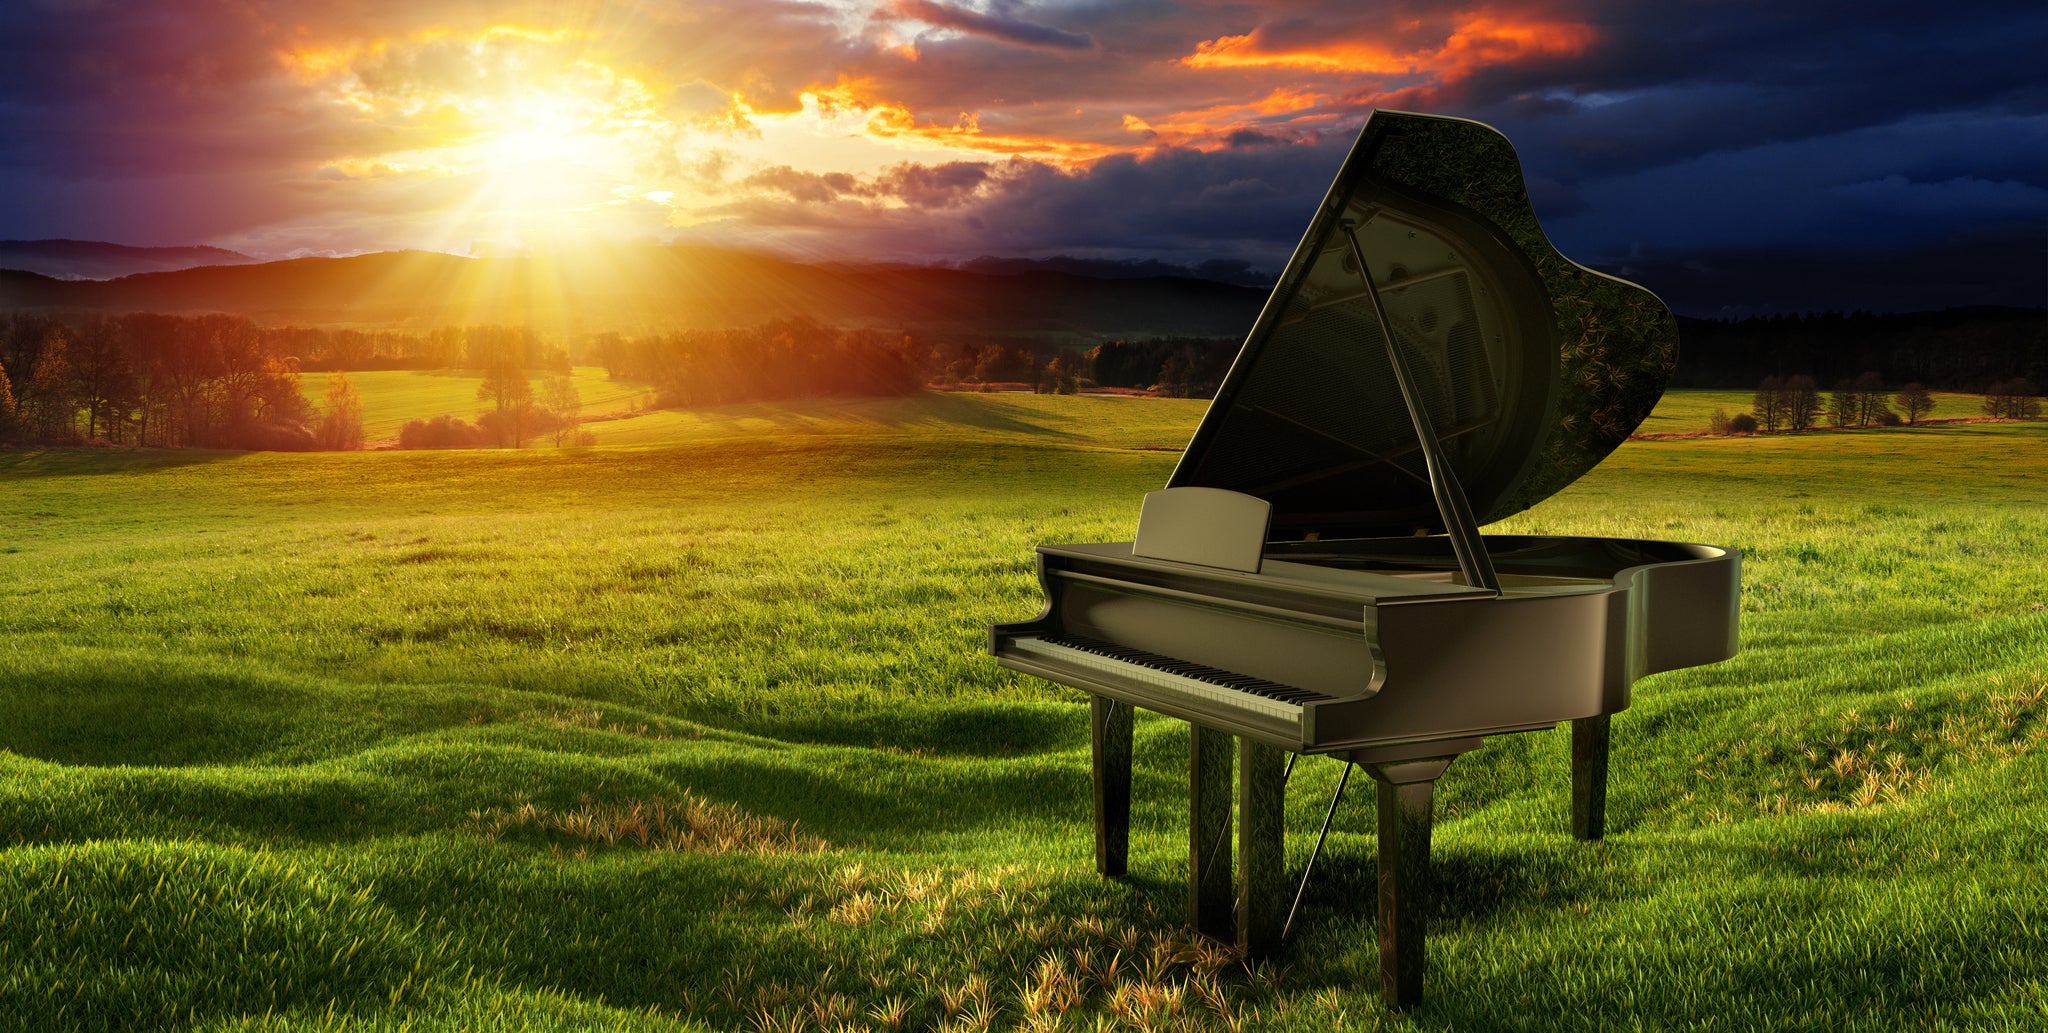 Piano in a field at sunrise